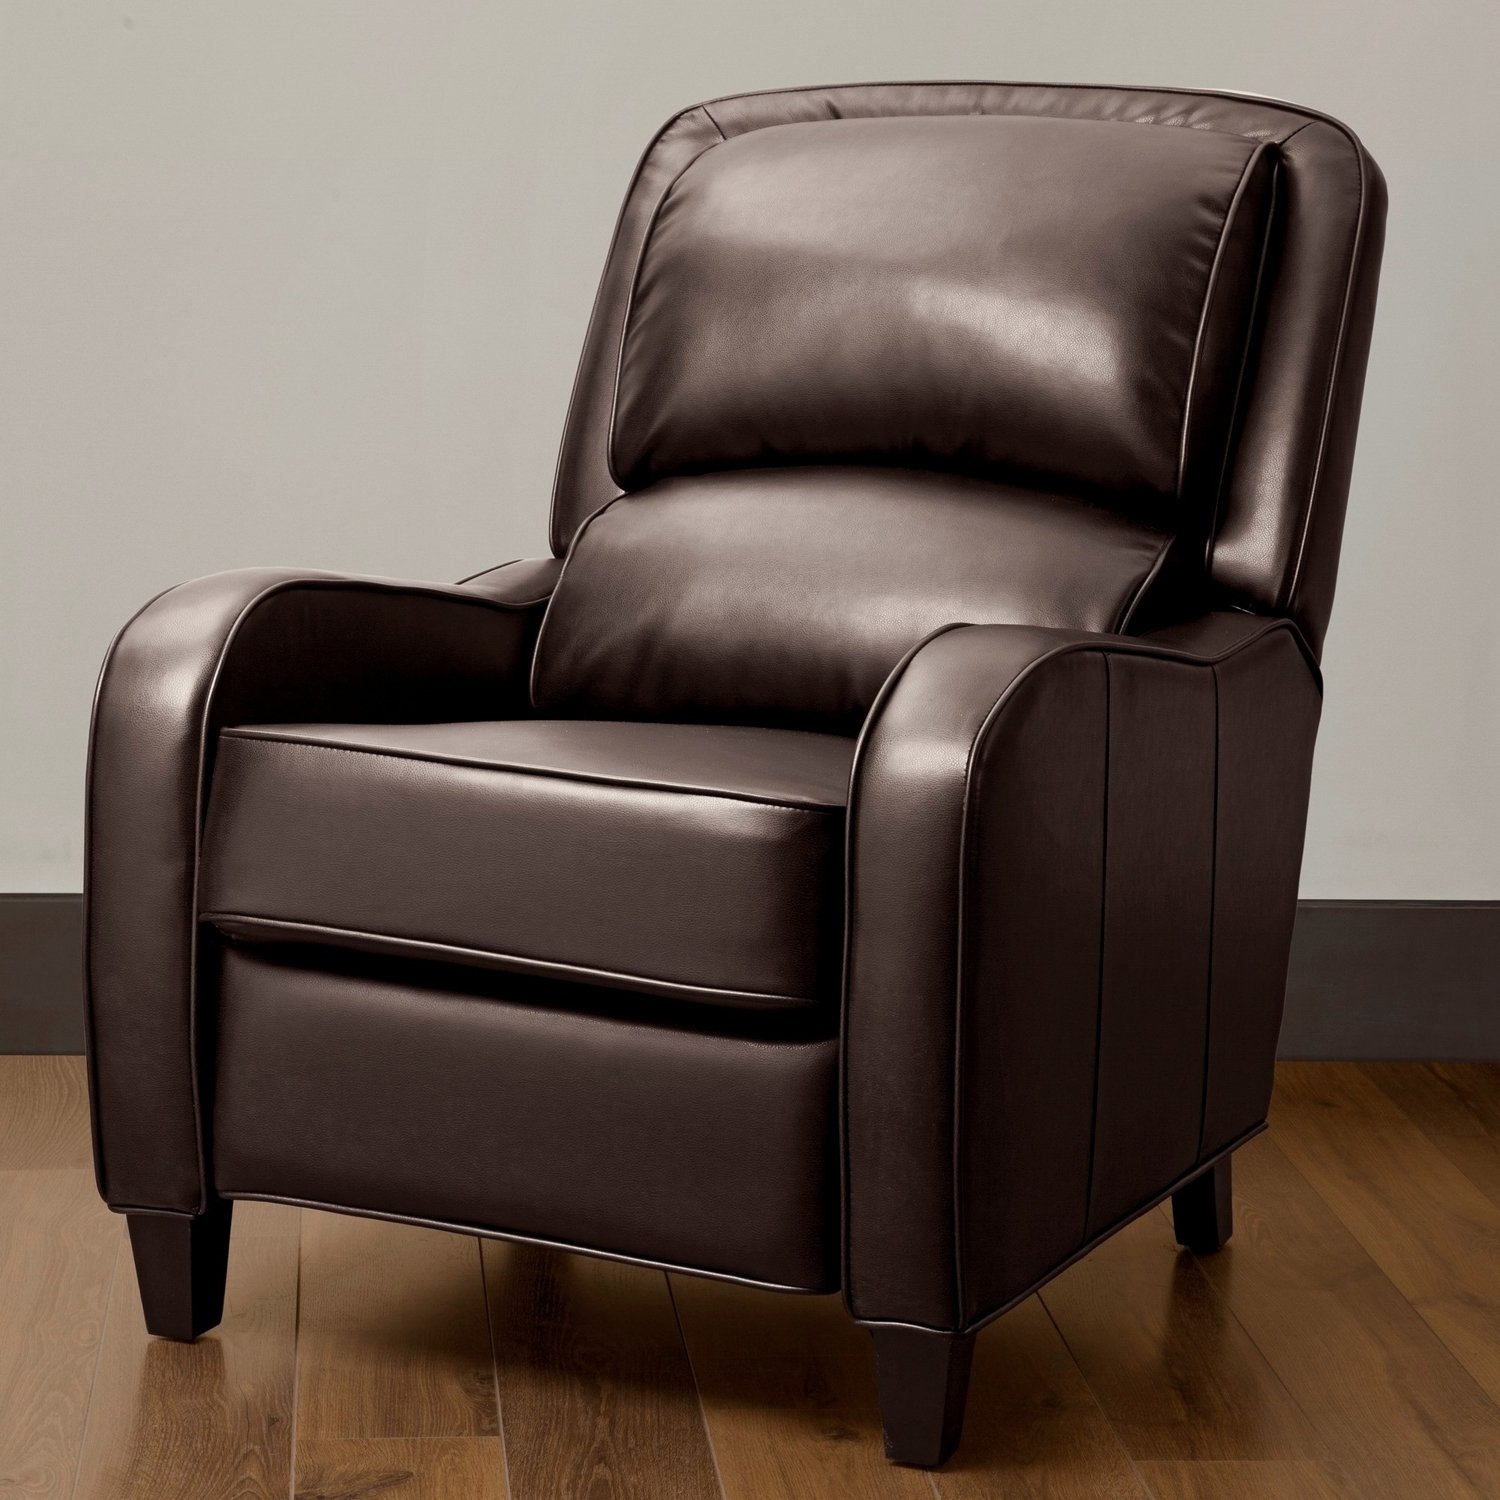 Recliners For Small Spaces Visualhunt, Small Black Leather Recliner